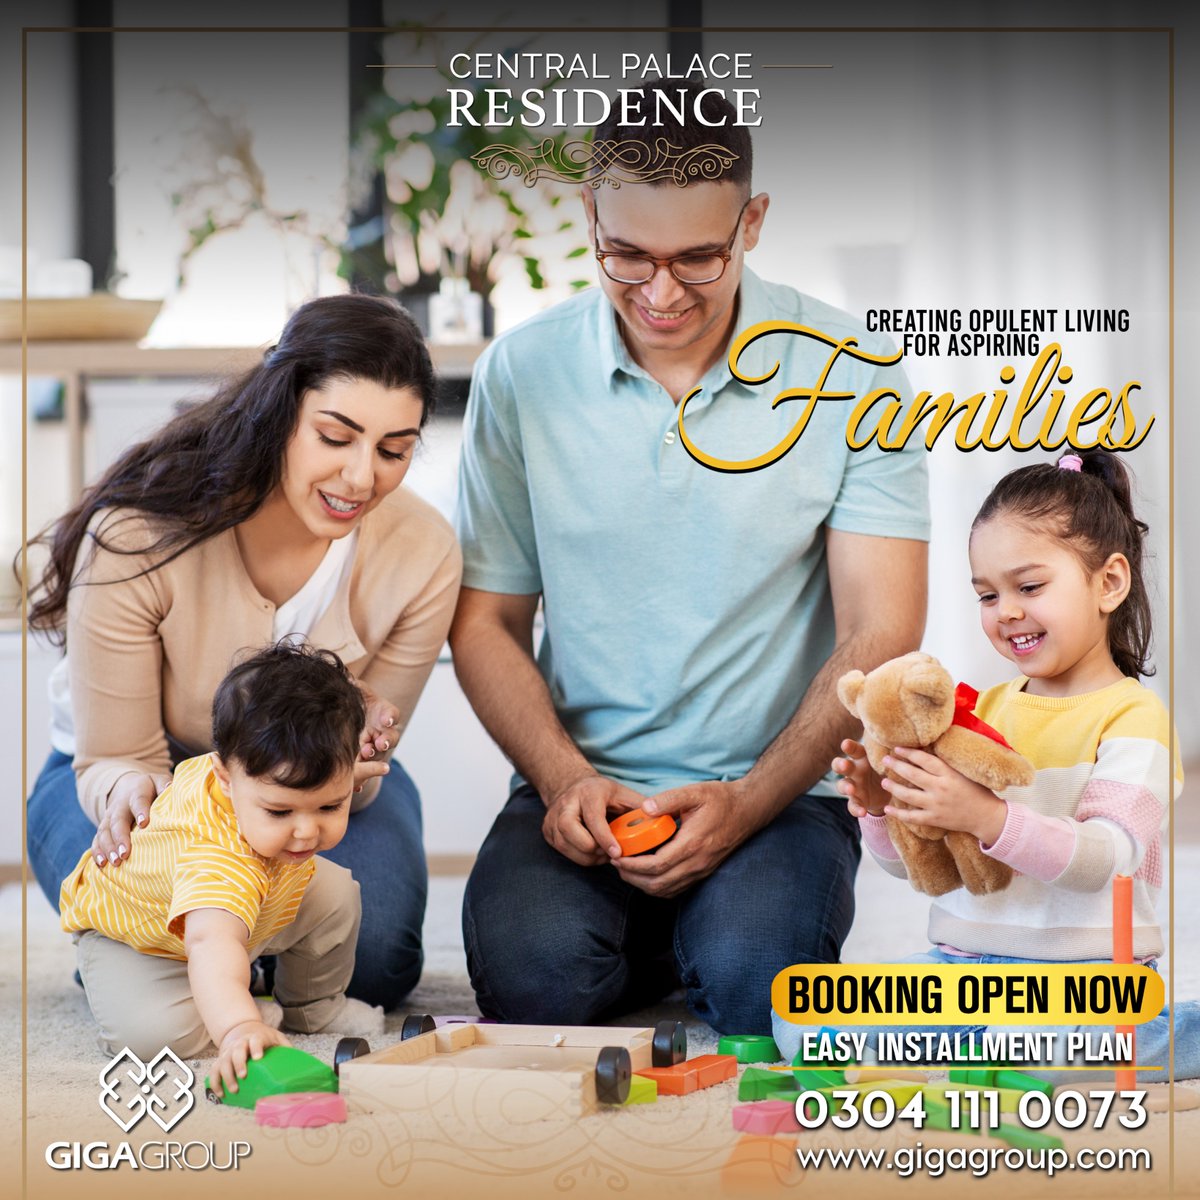 Creating opulence living for aspiring families!

Booking for one bedroom apartments is open now on an easy payment plan.
#gigagroup #centralpalaceresidence #urbanliving #AffordableHomes #towncentercommercial #commercialshops #specialdiscountedoffer #bookingopen #booknow